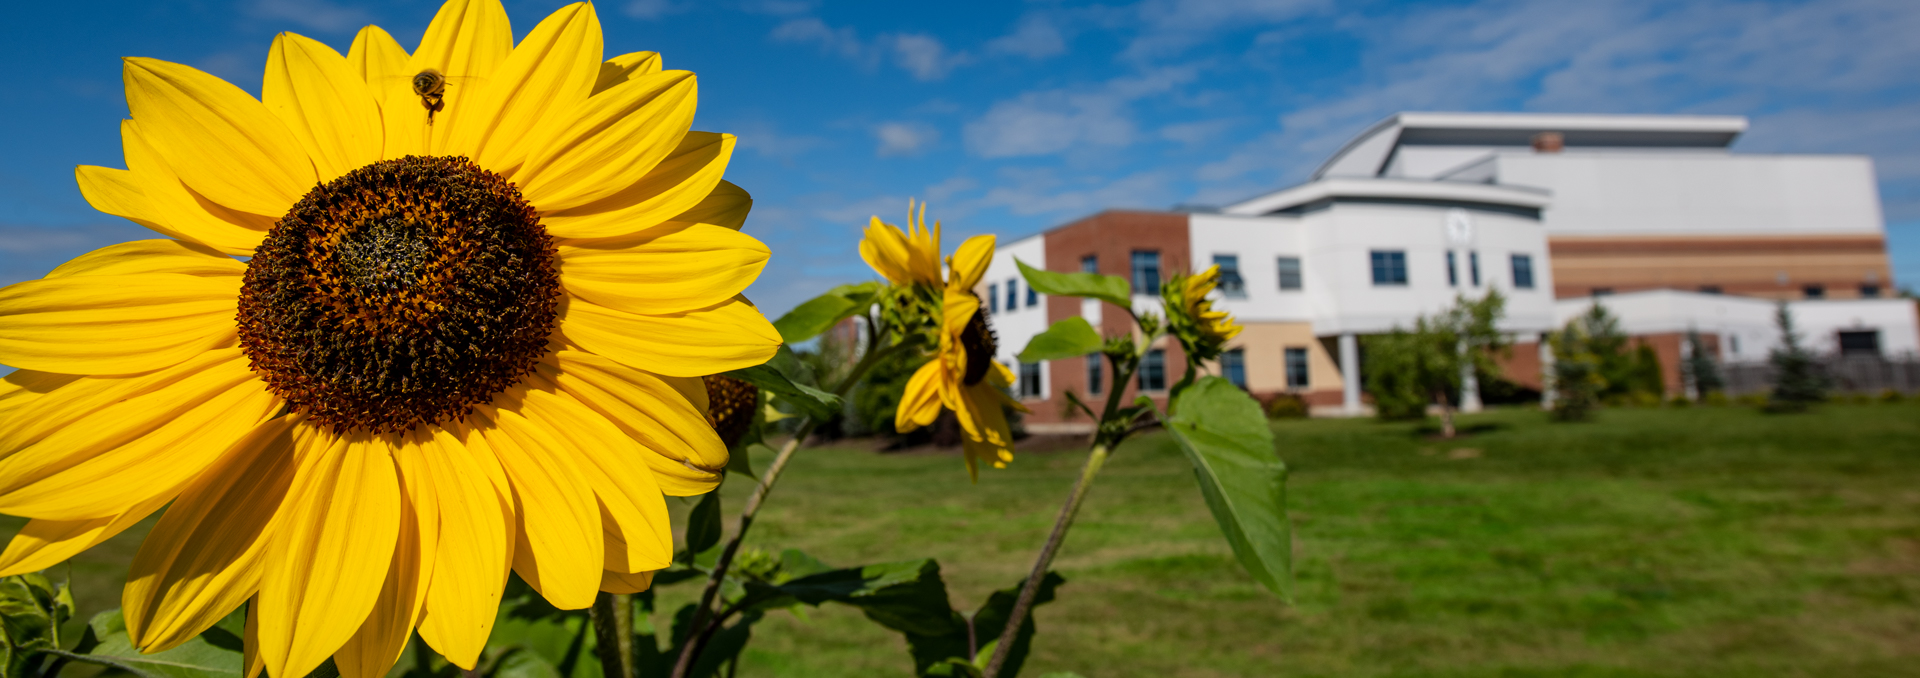 Sunflowers on the campus of Husson University